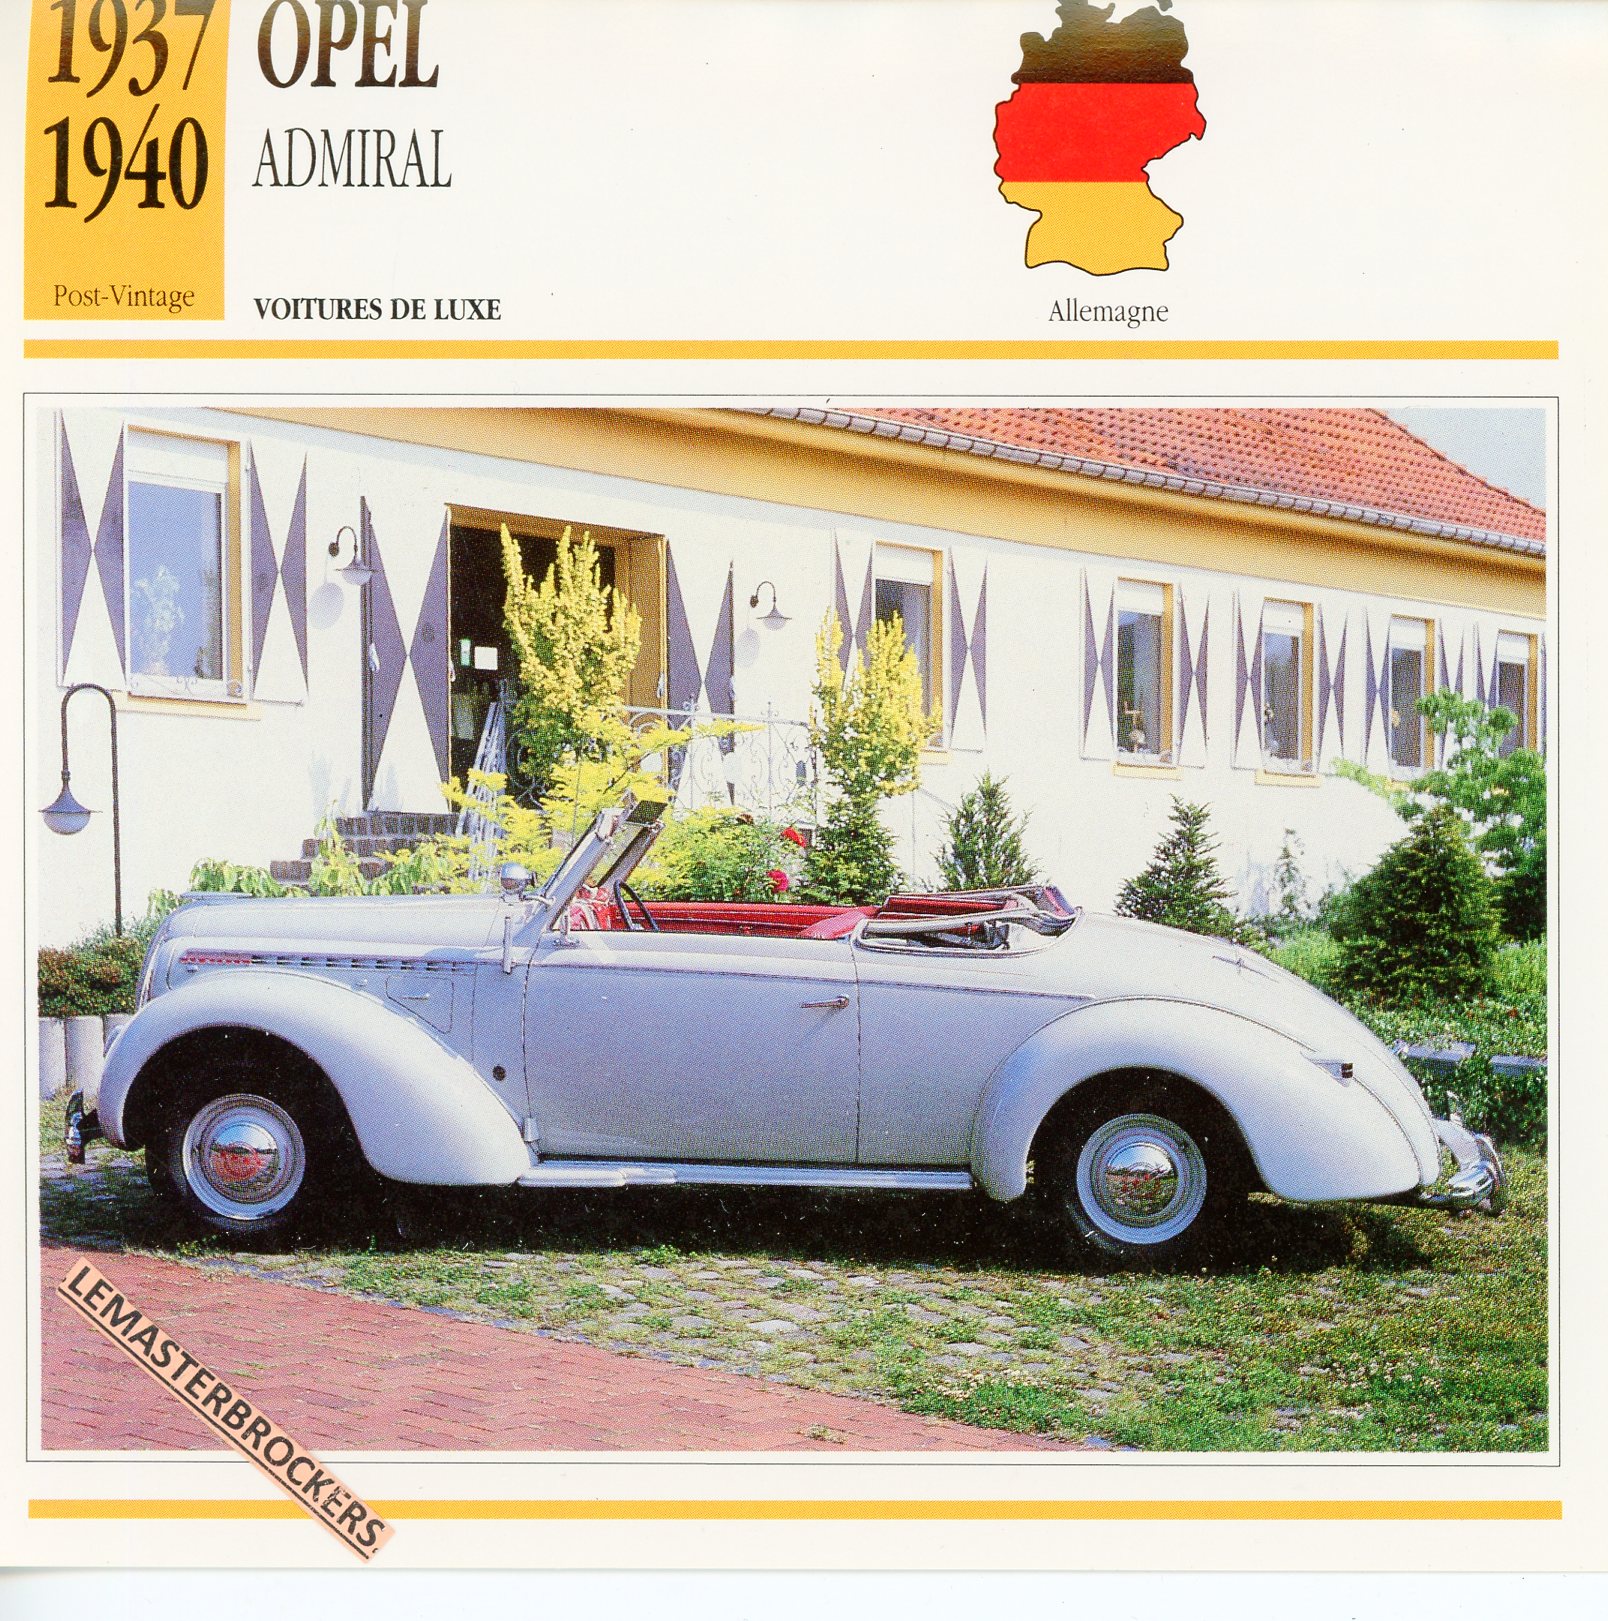 FICHE-OPEL-ADMIRAL-LEMASTERBROCKERS-FICHE-AUTO-CARS-CARD-ATLAS-FRENCH